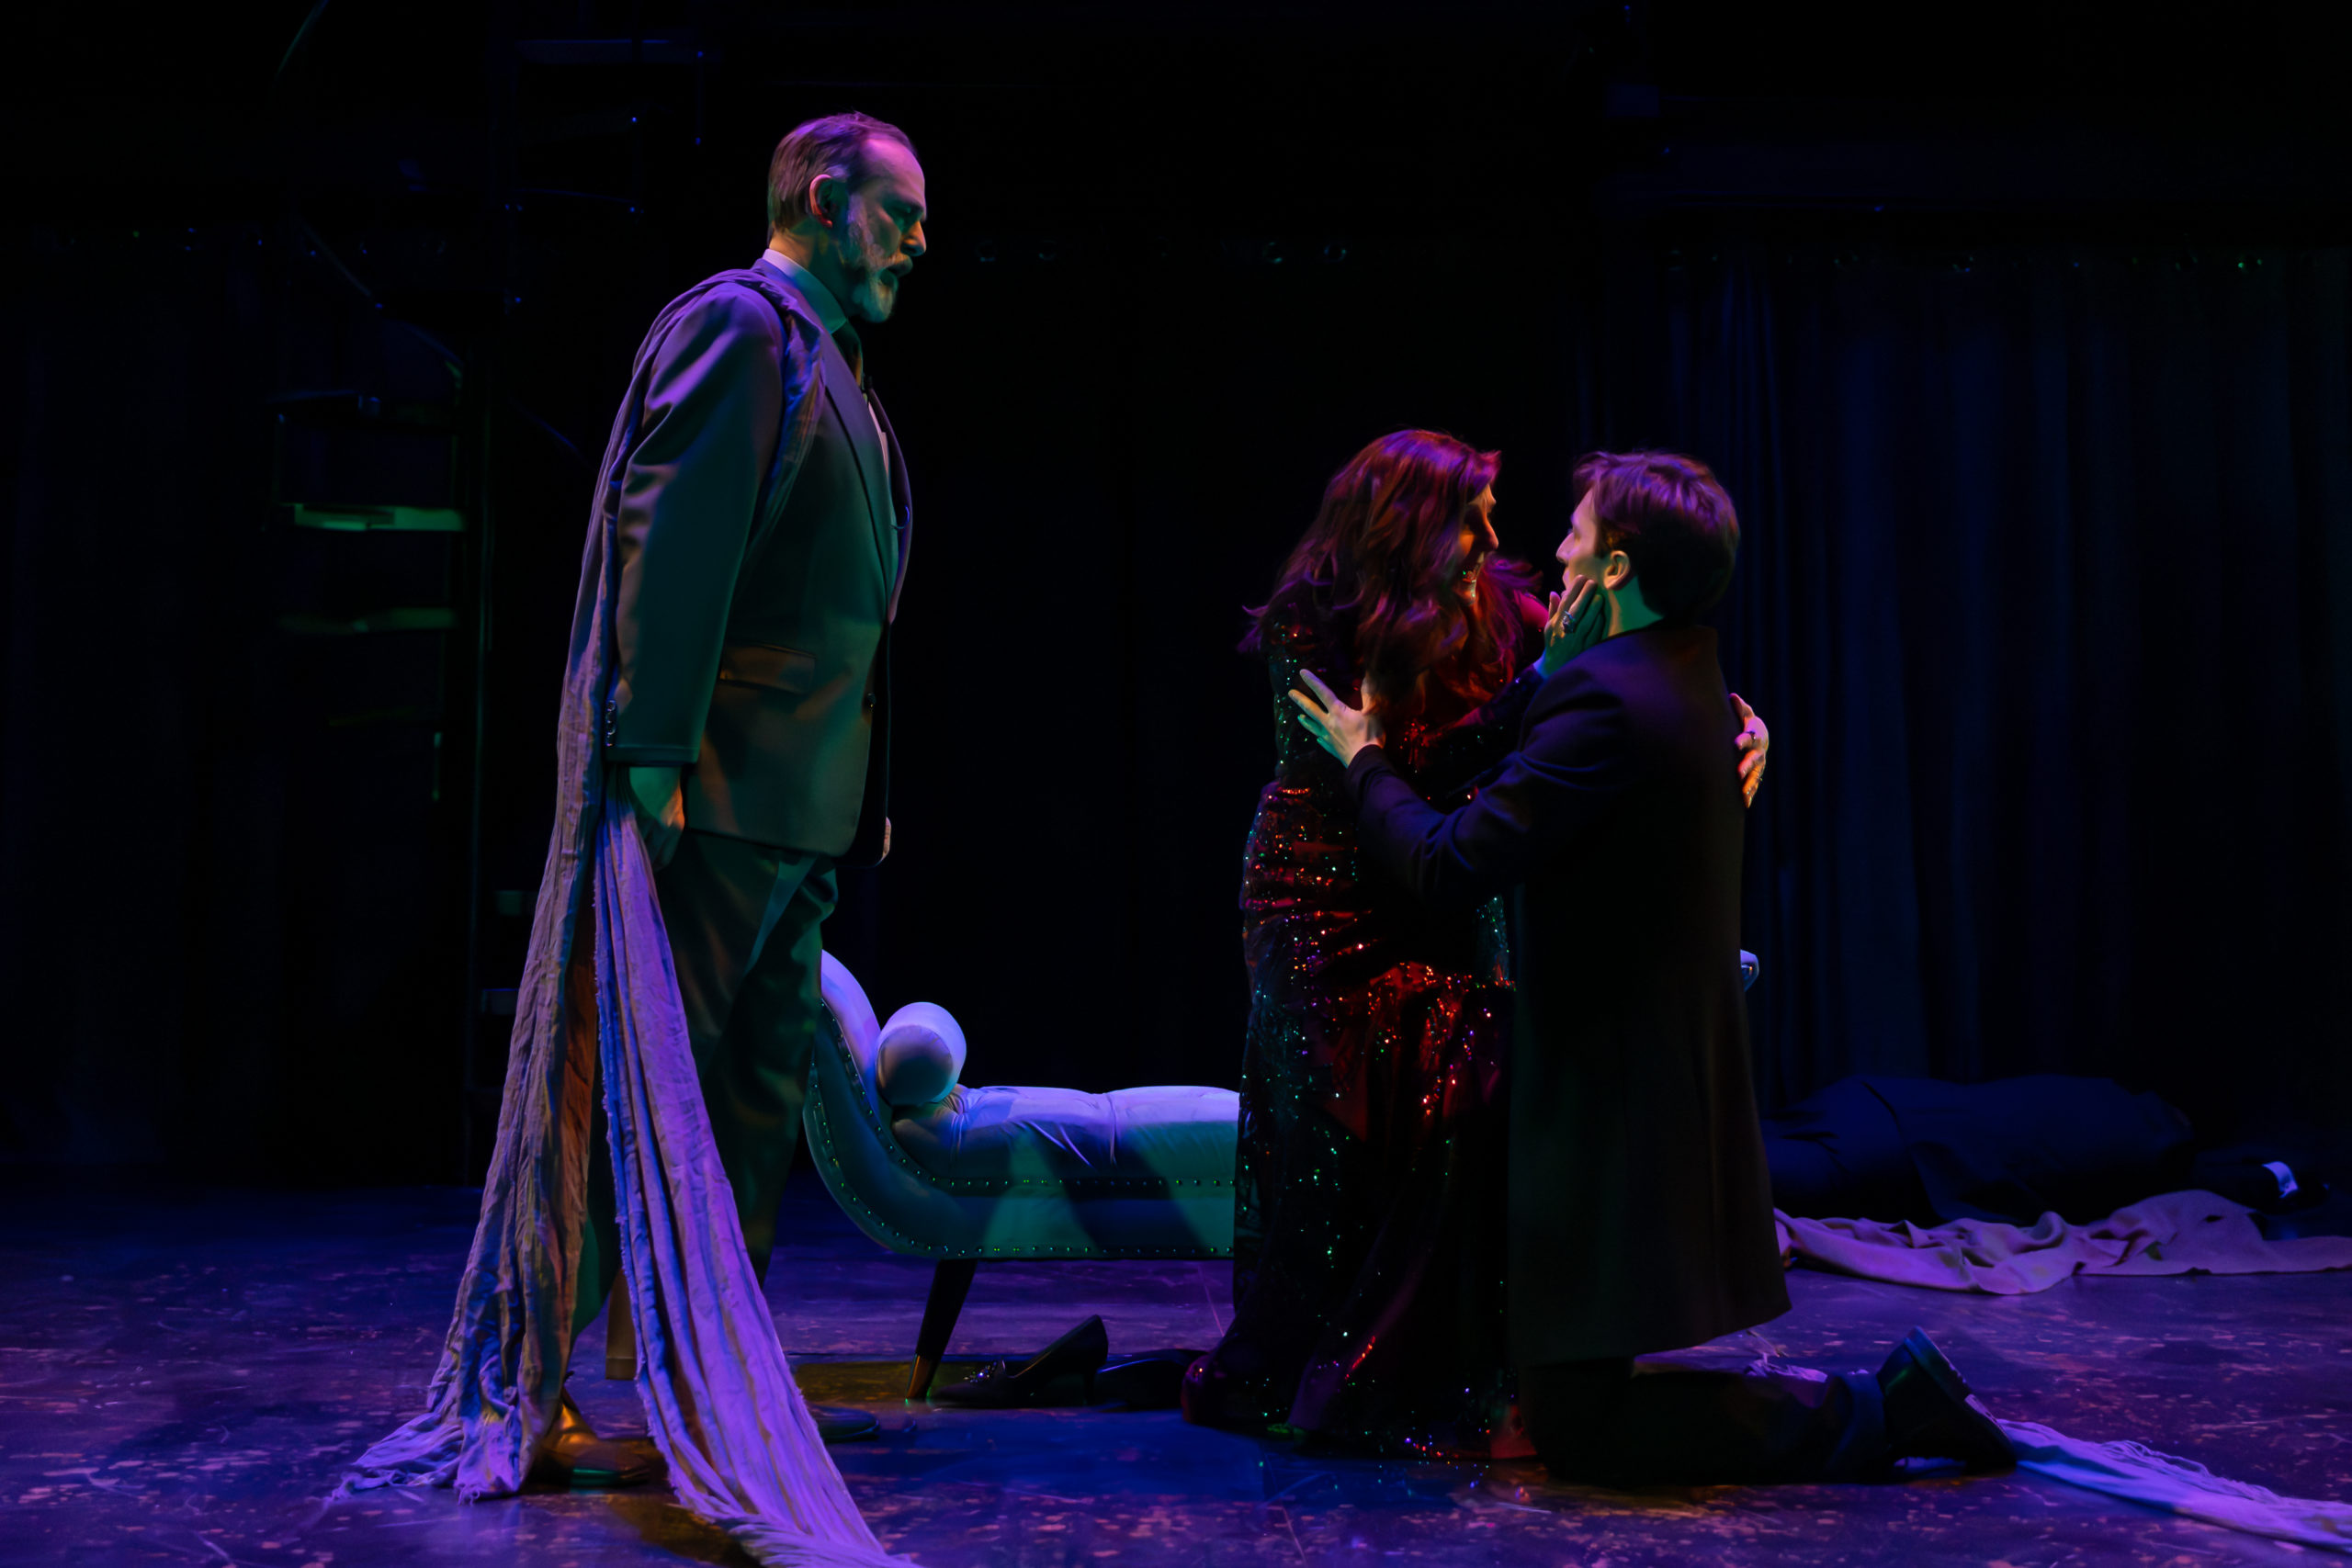 David Yezzi (Ghost of Hamlet's Father), Lesley Malin (Gertrude), and Vince Eisenon (Hamlet) in HAMLET. Photo by Kiistn Pagan Photography.